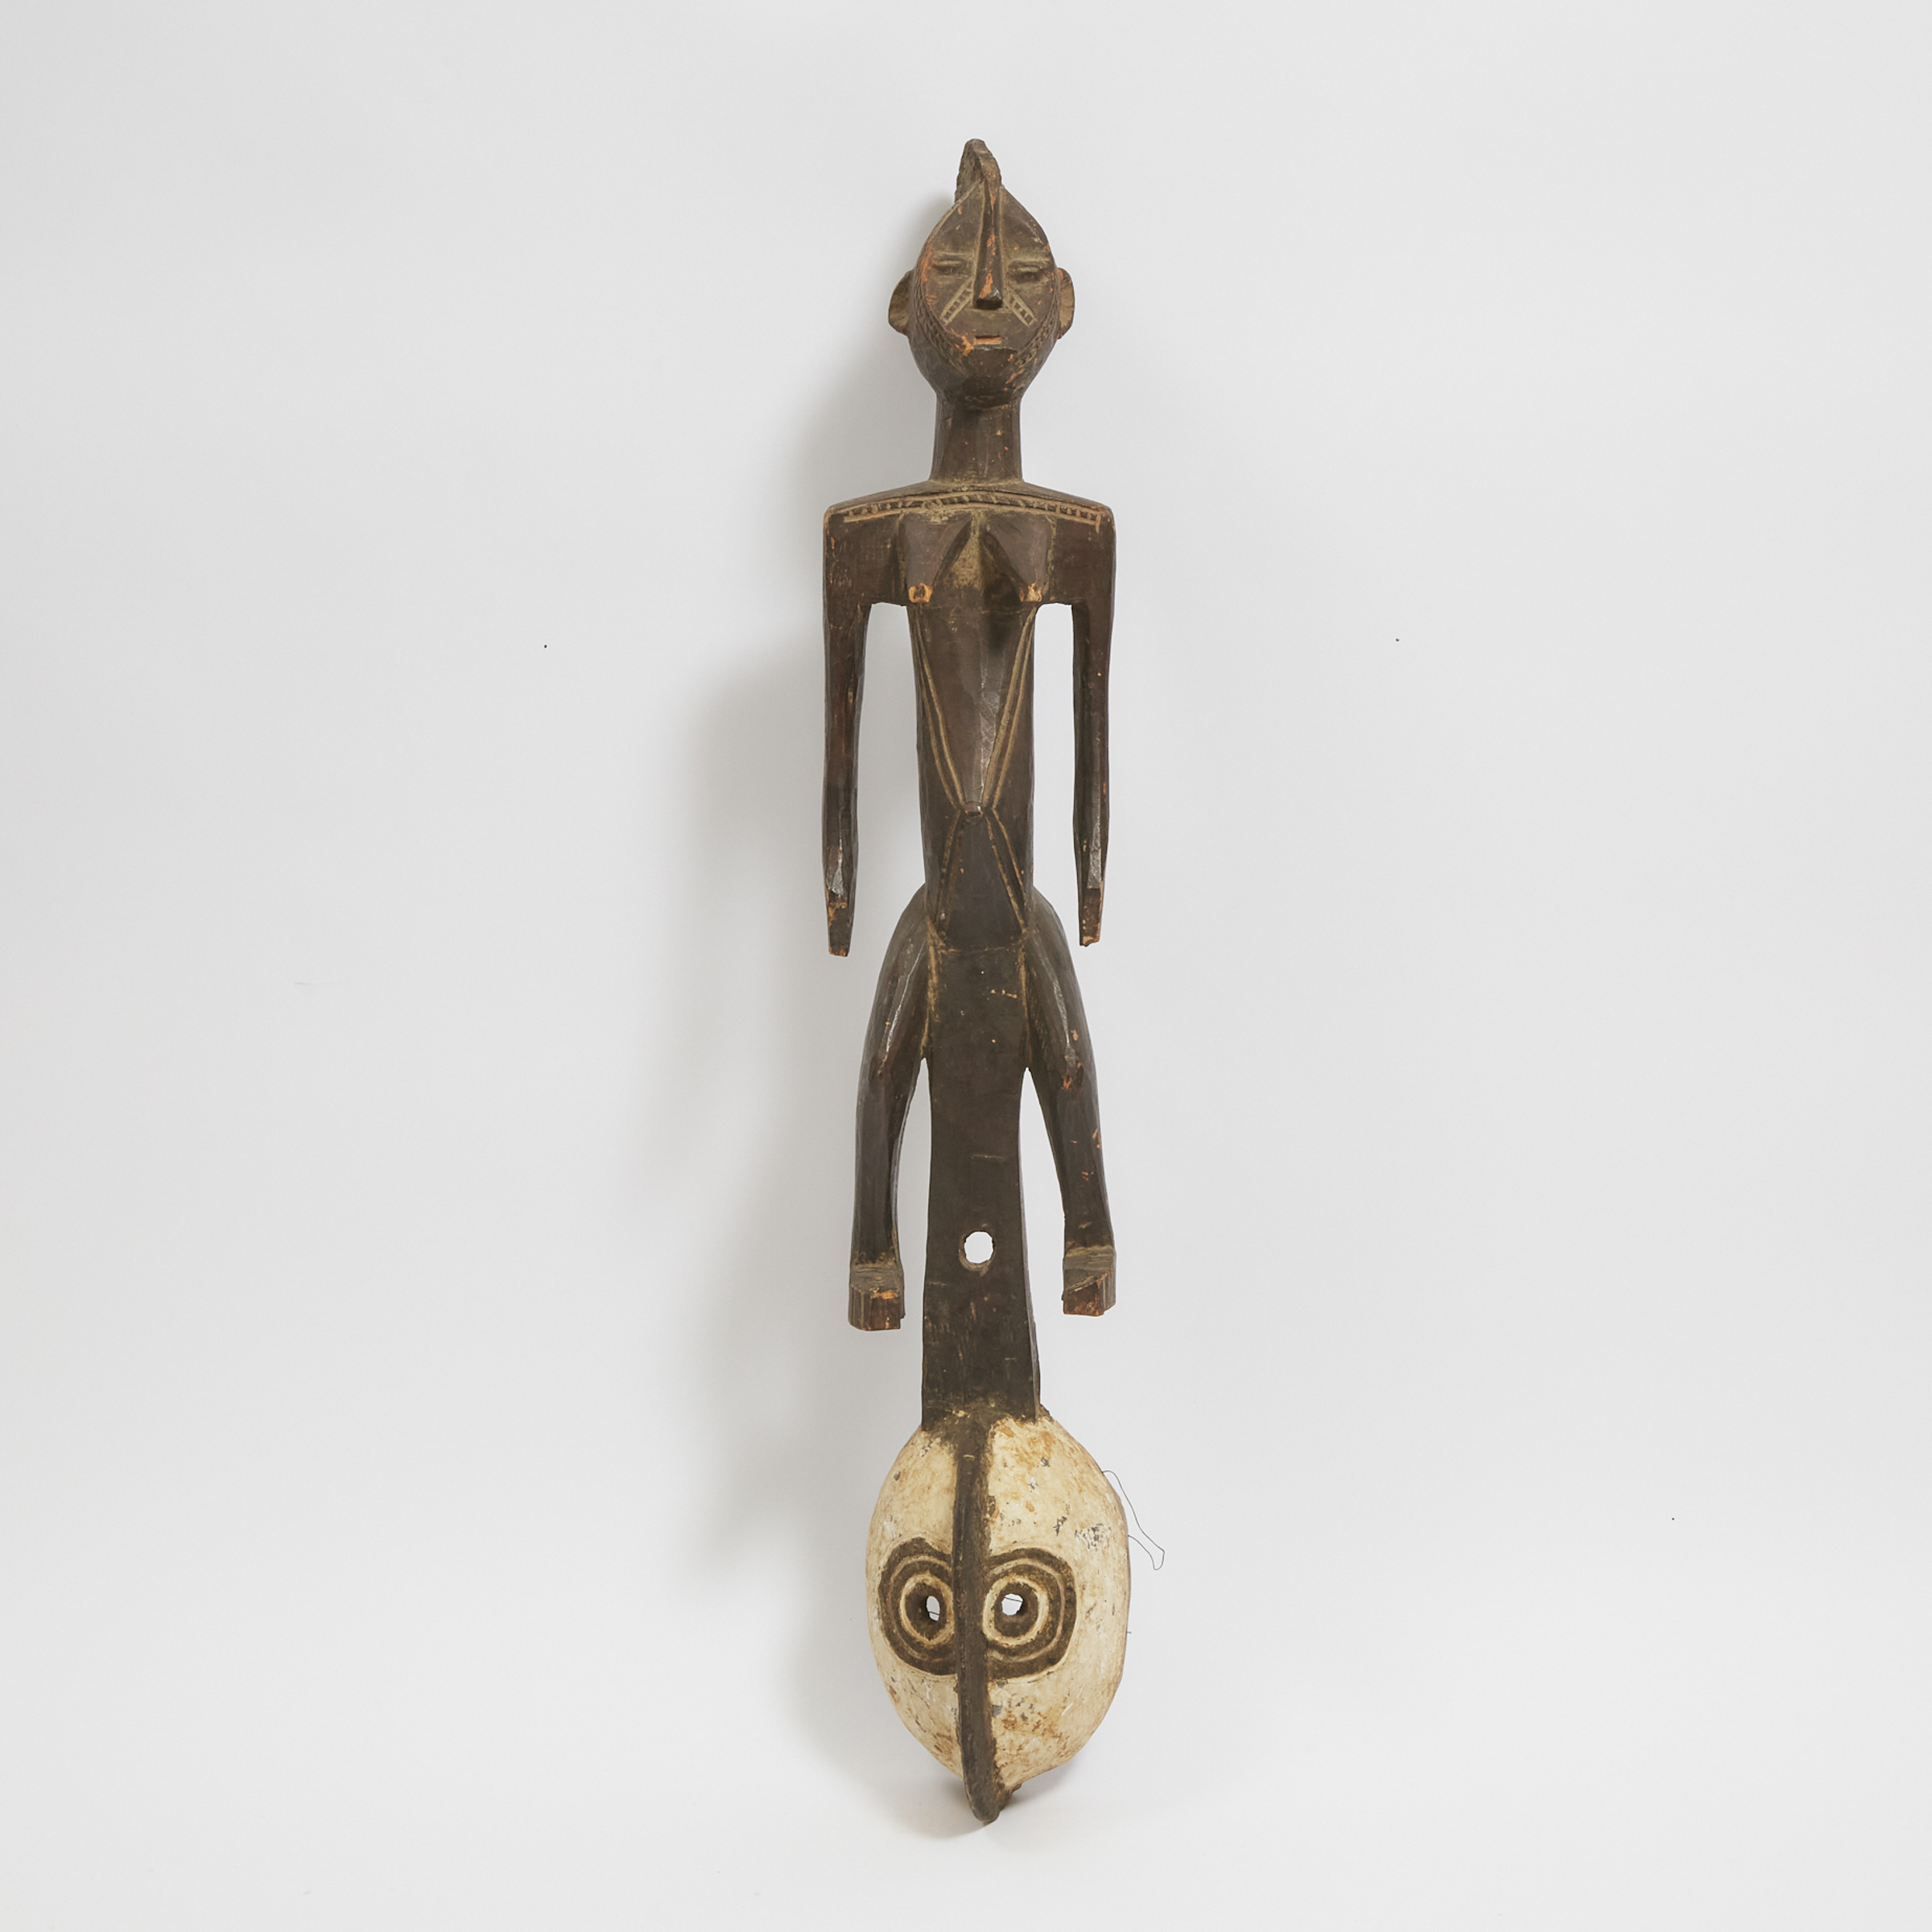 Bamana Mask with Figural Surmount, Mali, West Africa, mid to late 20th century